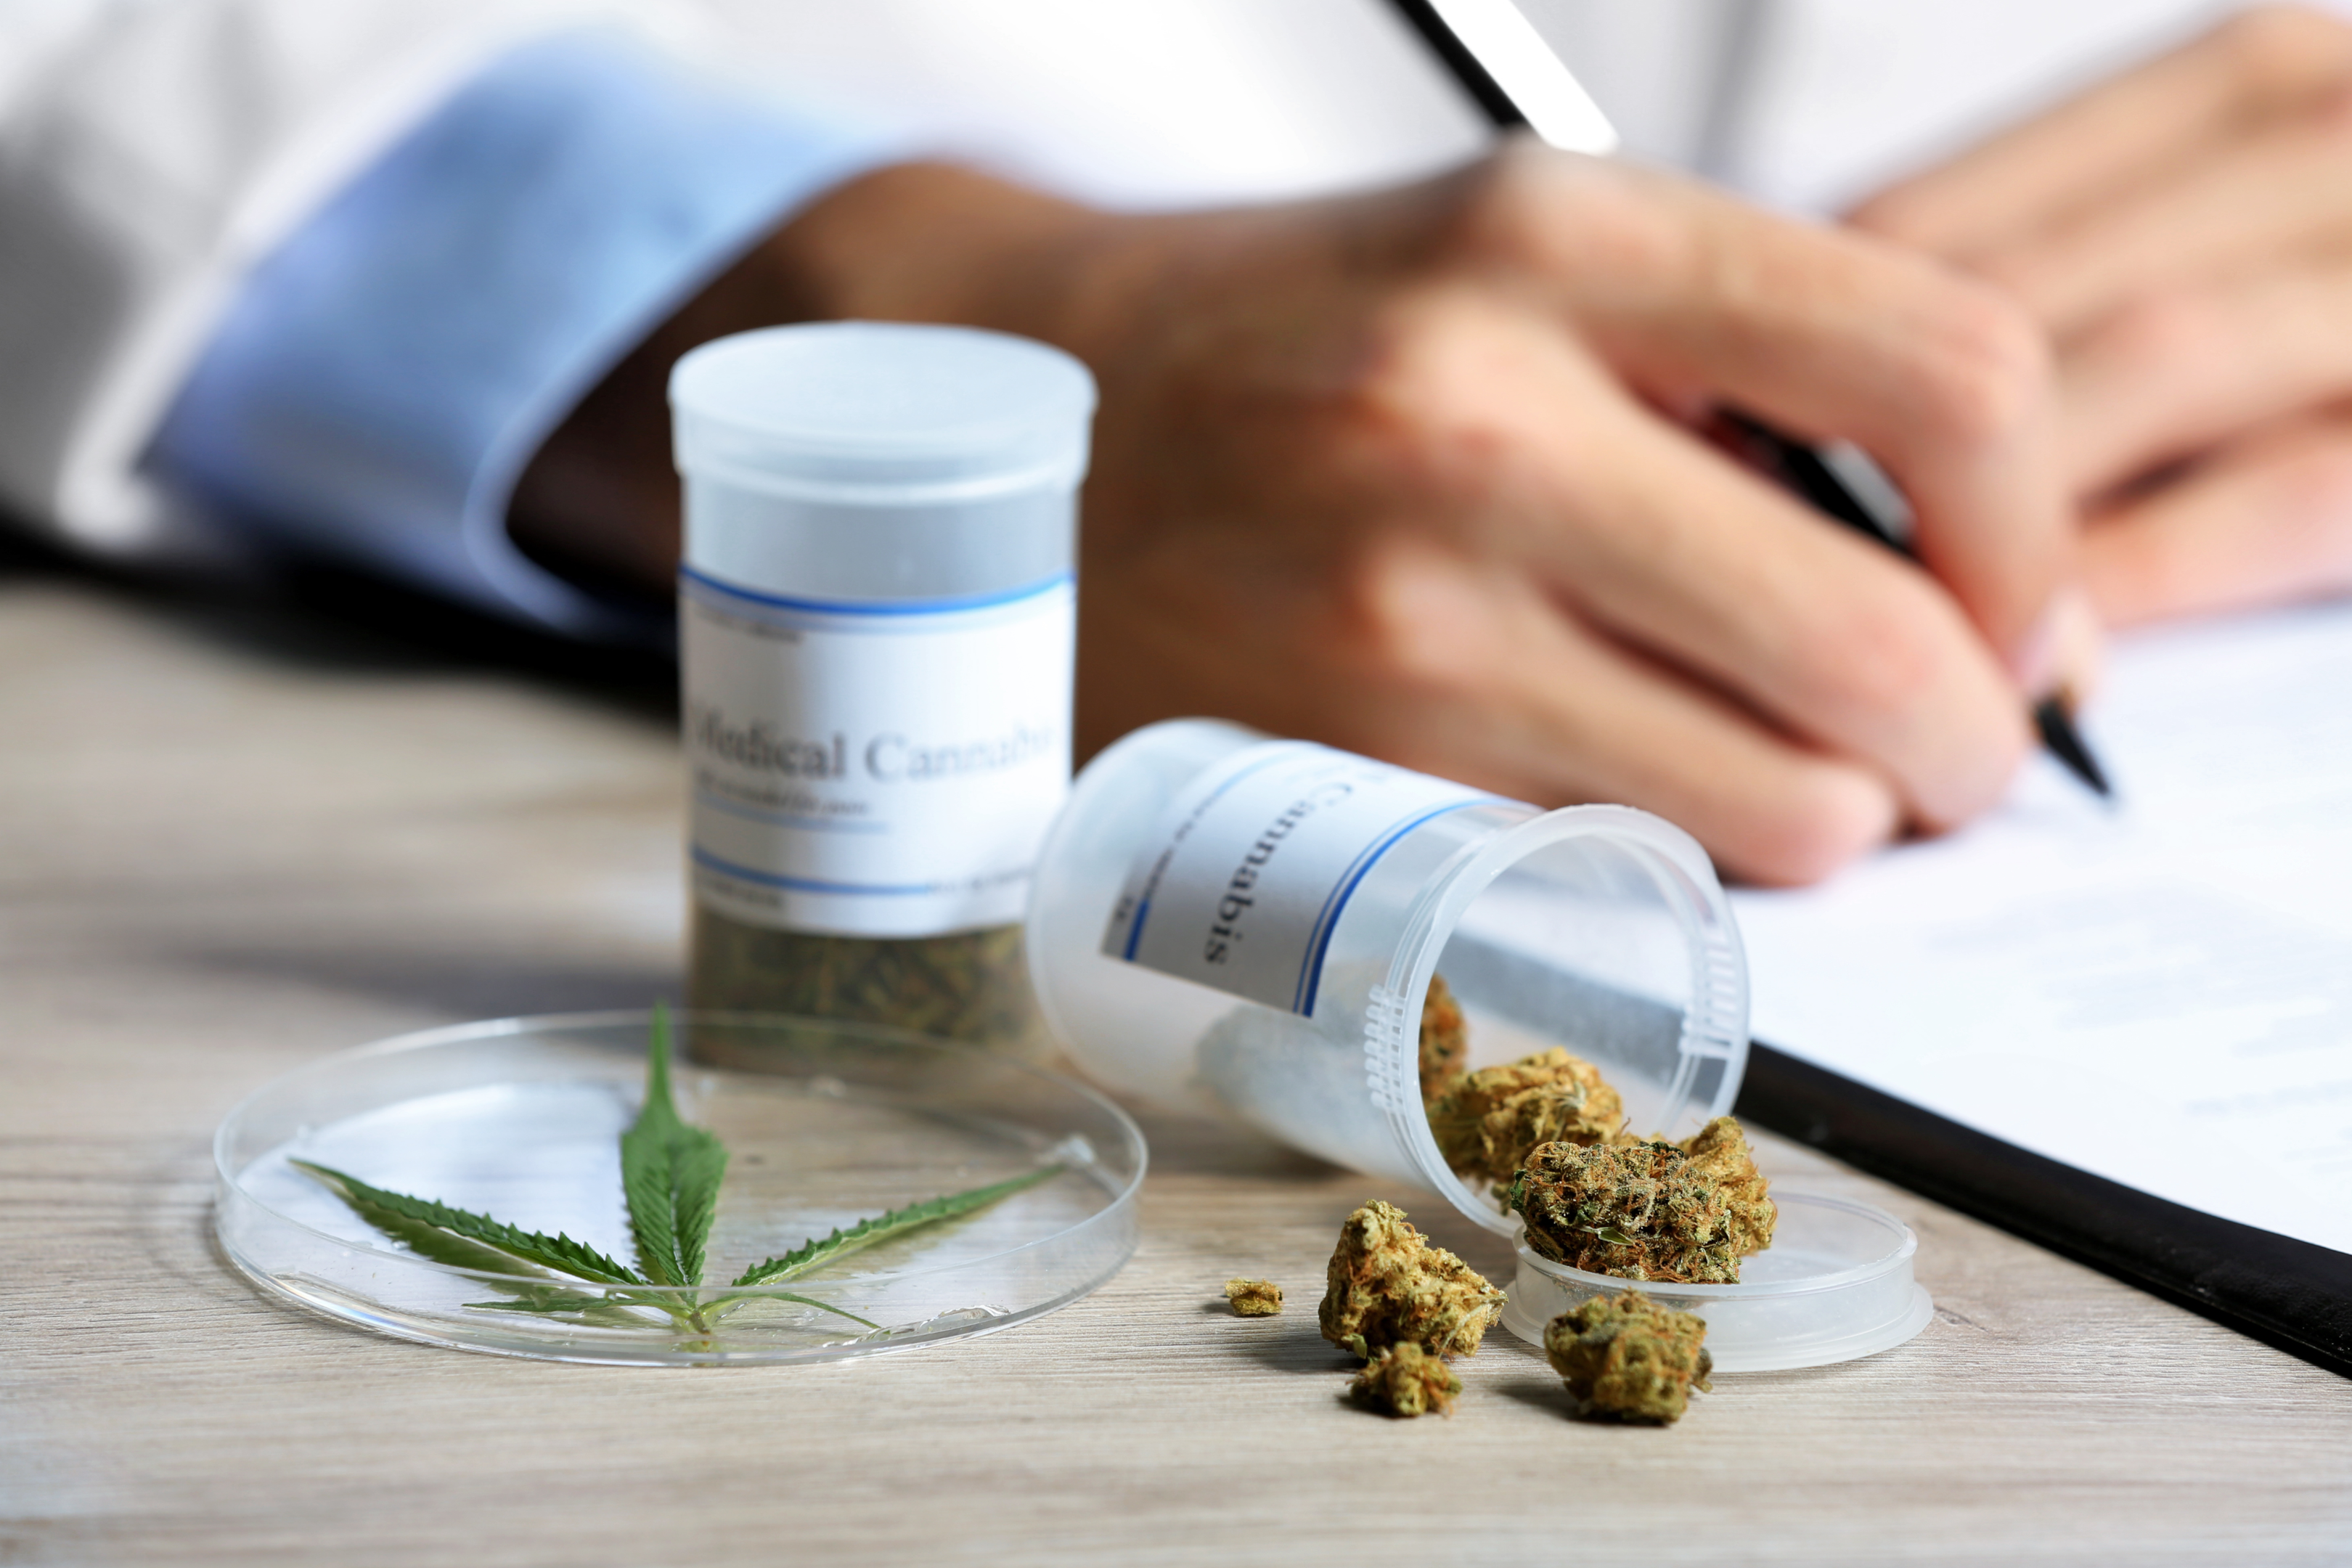 Medical cannabis and cannabinoids have been approved for prescription treatment in some states for patients. THC and health have been explored by national institutes that study cannabis and some by university studies.